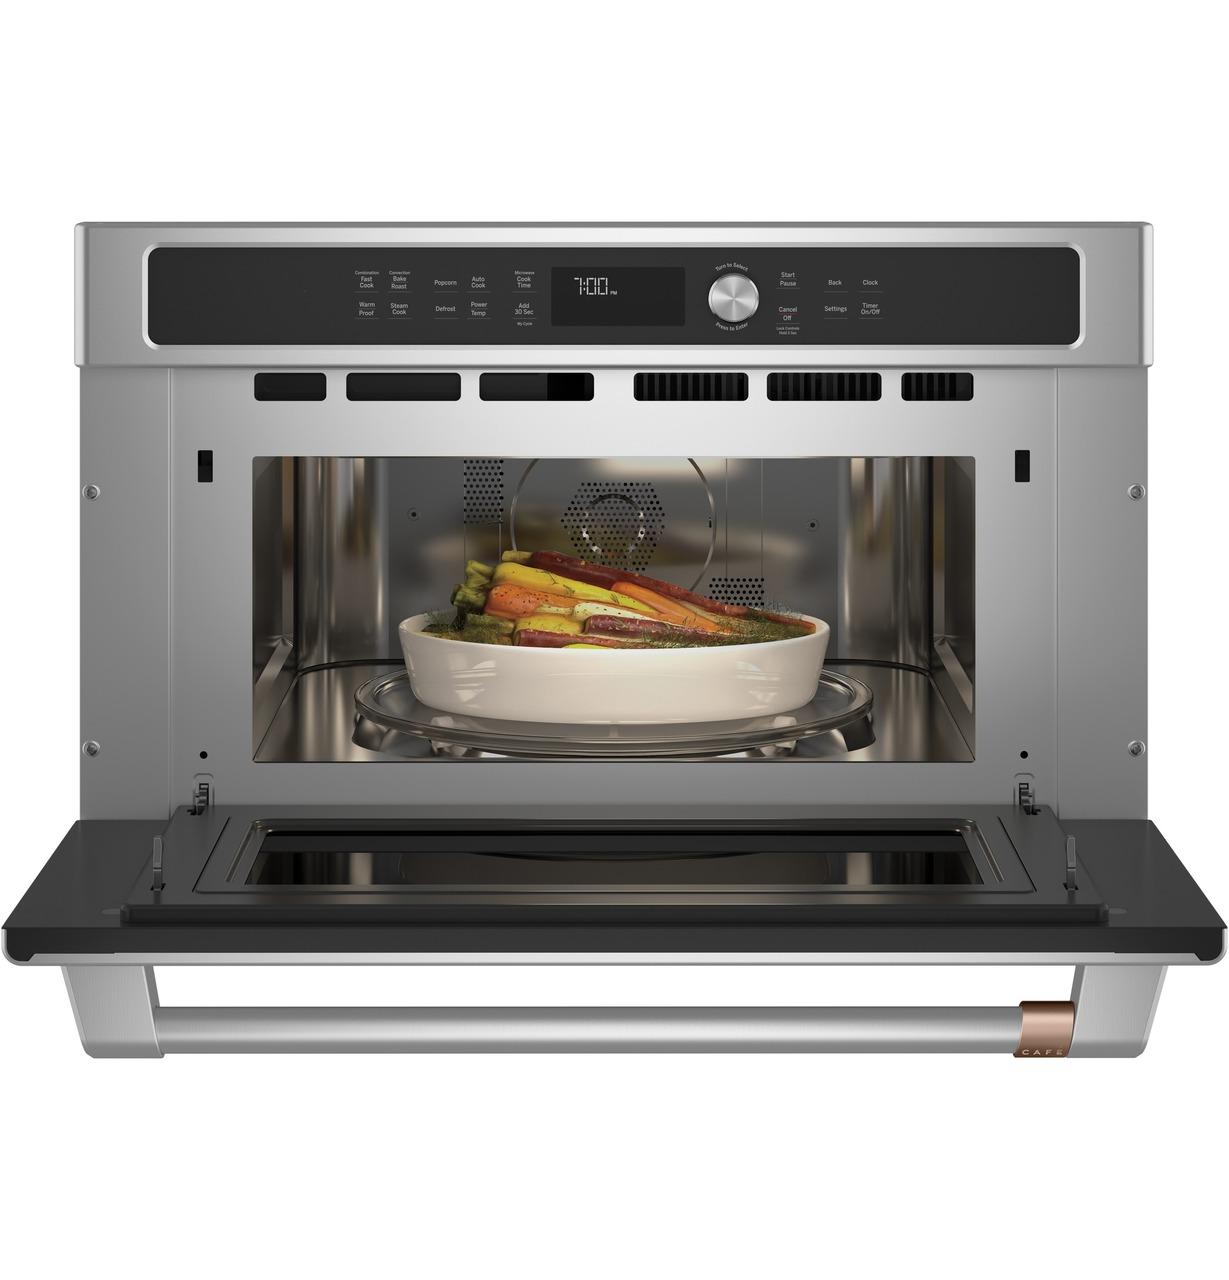 Cafe Caf(eback)™ Built-In Microwave/Convection Oven